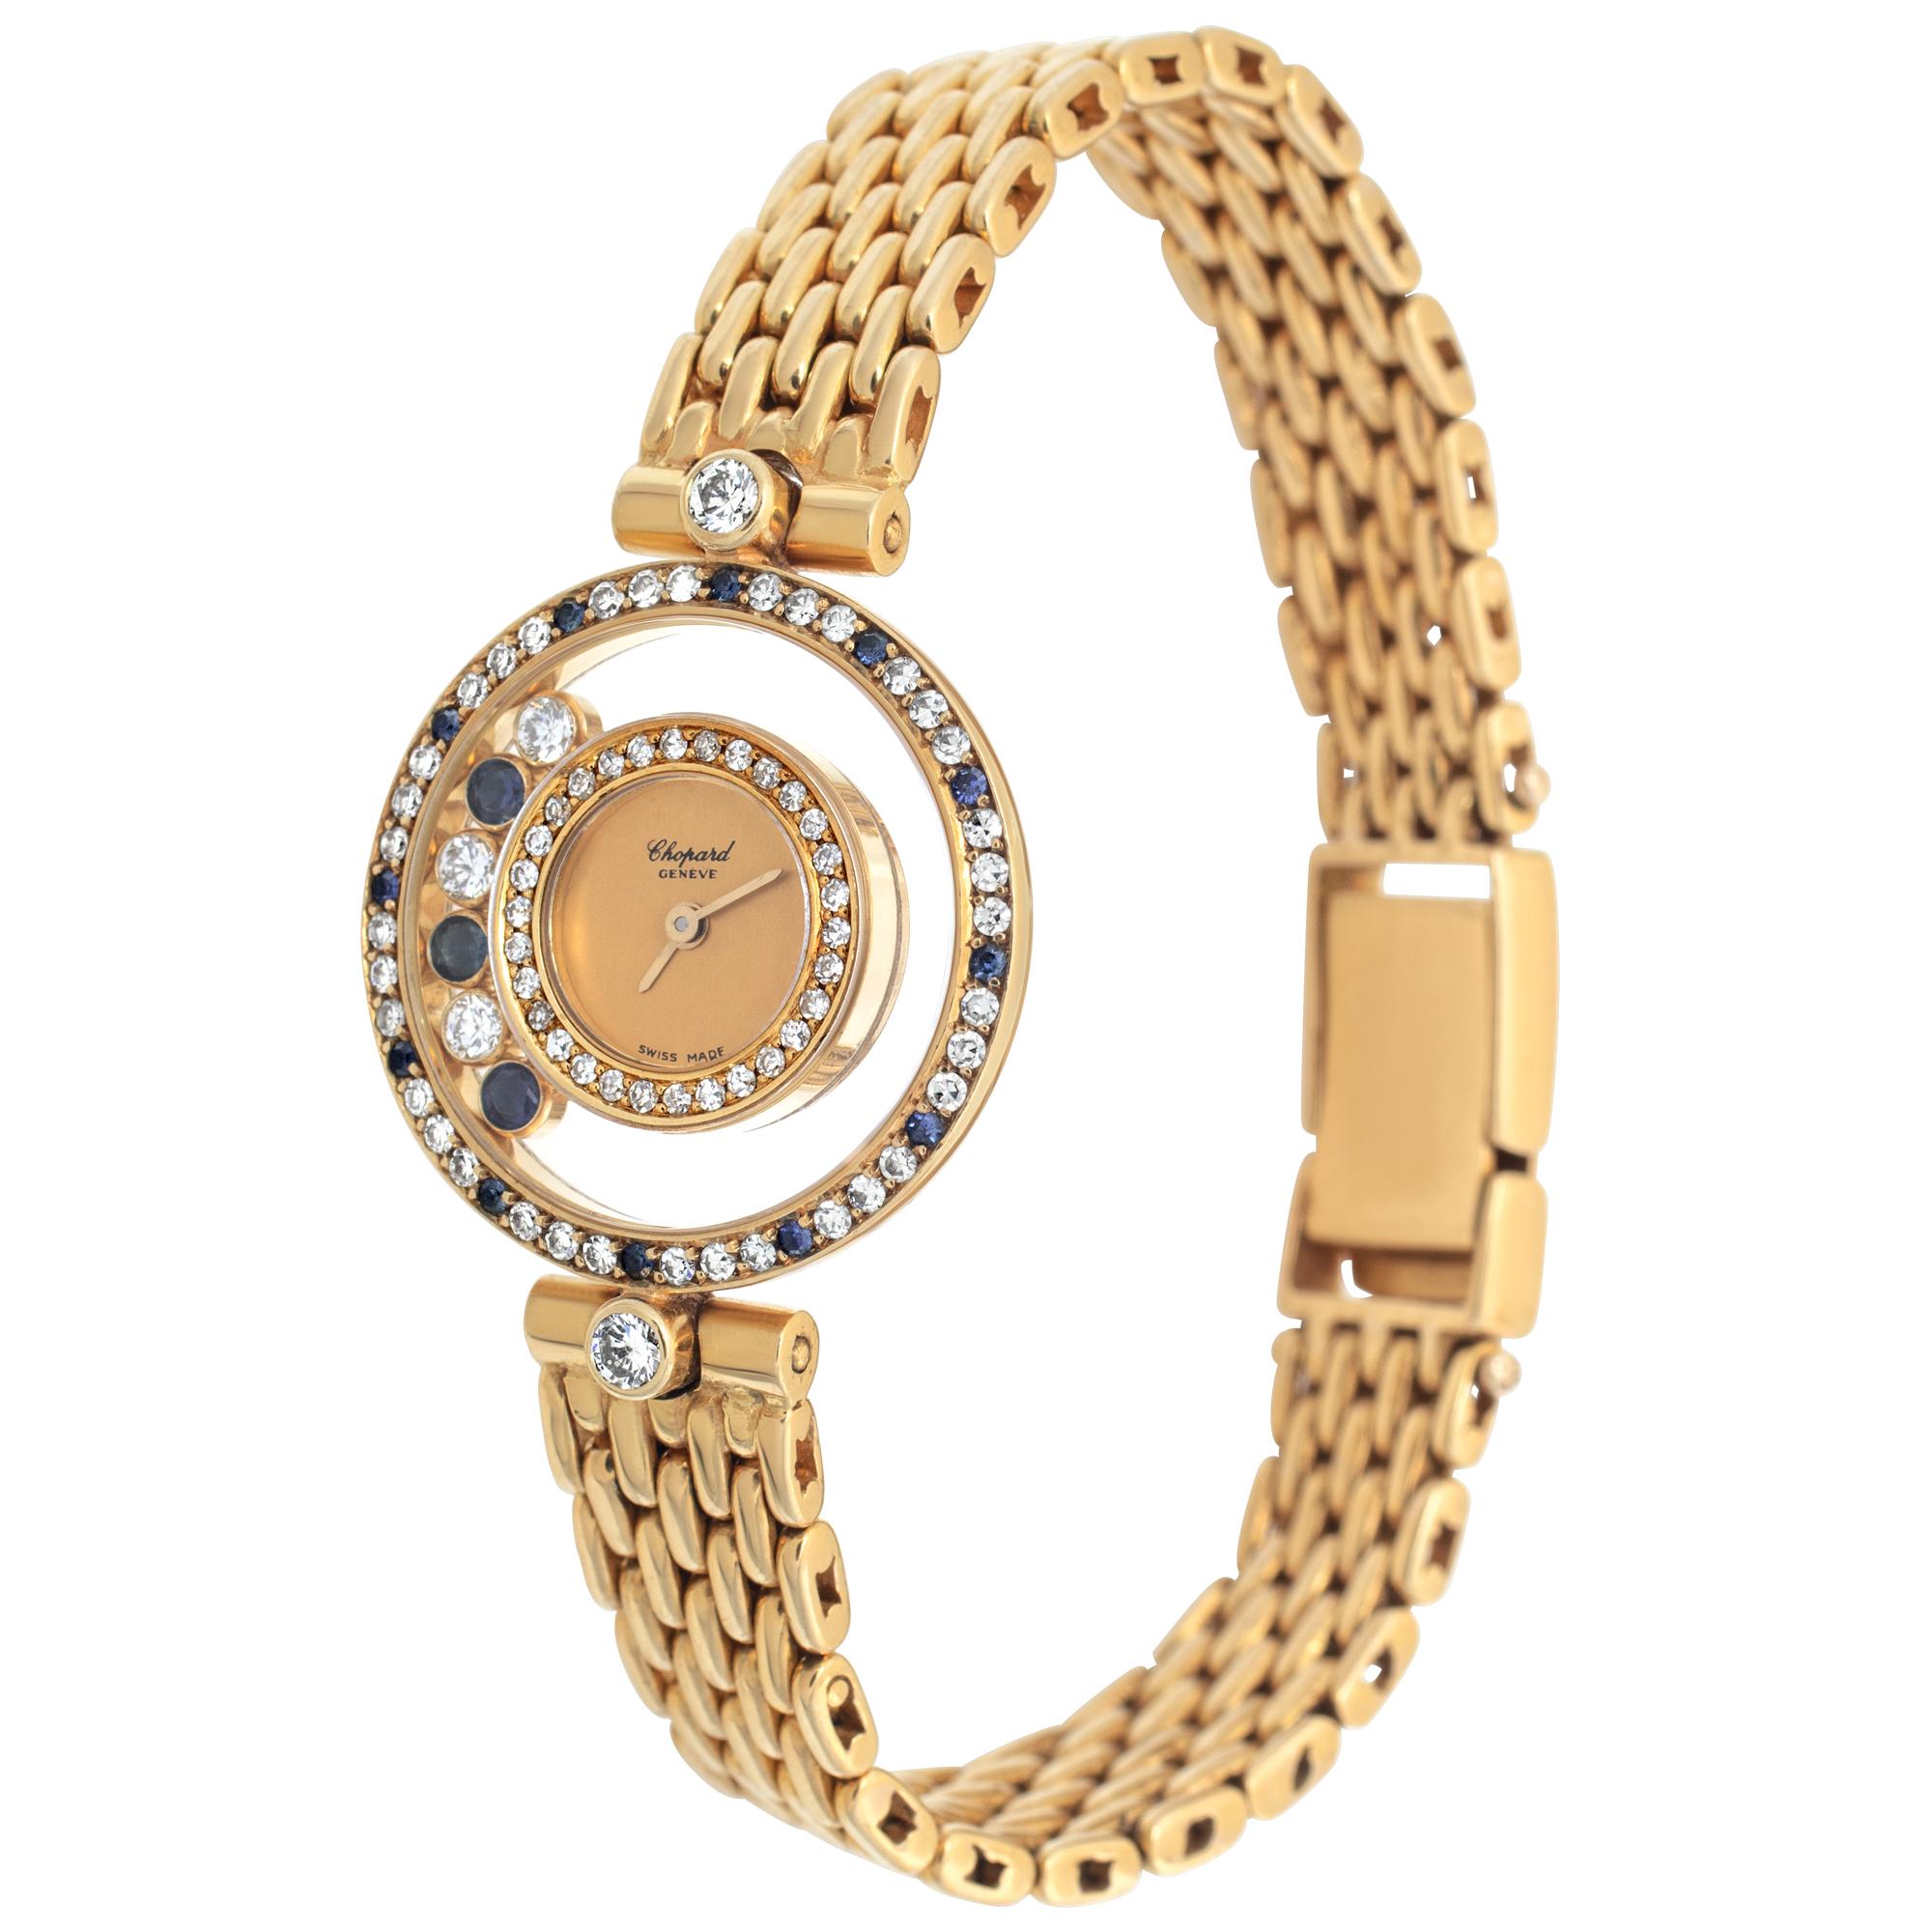 Chopard Happy Diamond in 18k yellow gold with diamonds and sapphire bezel and floating diamonds and sapphire accents. Quartz. 24 mm case size. Ref 295084103. With Chopard gold pusher, extra black leather strap, and booklets. Fine Pre-owned Chopard